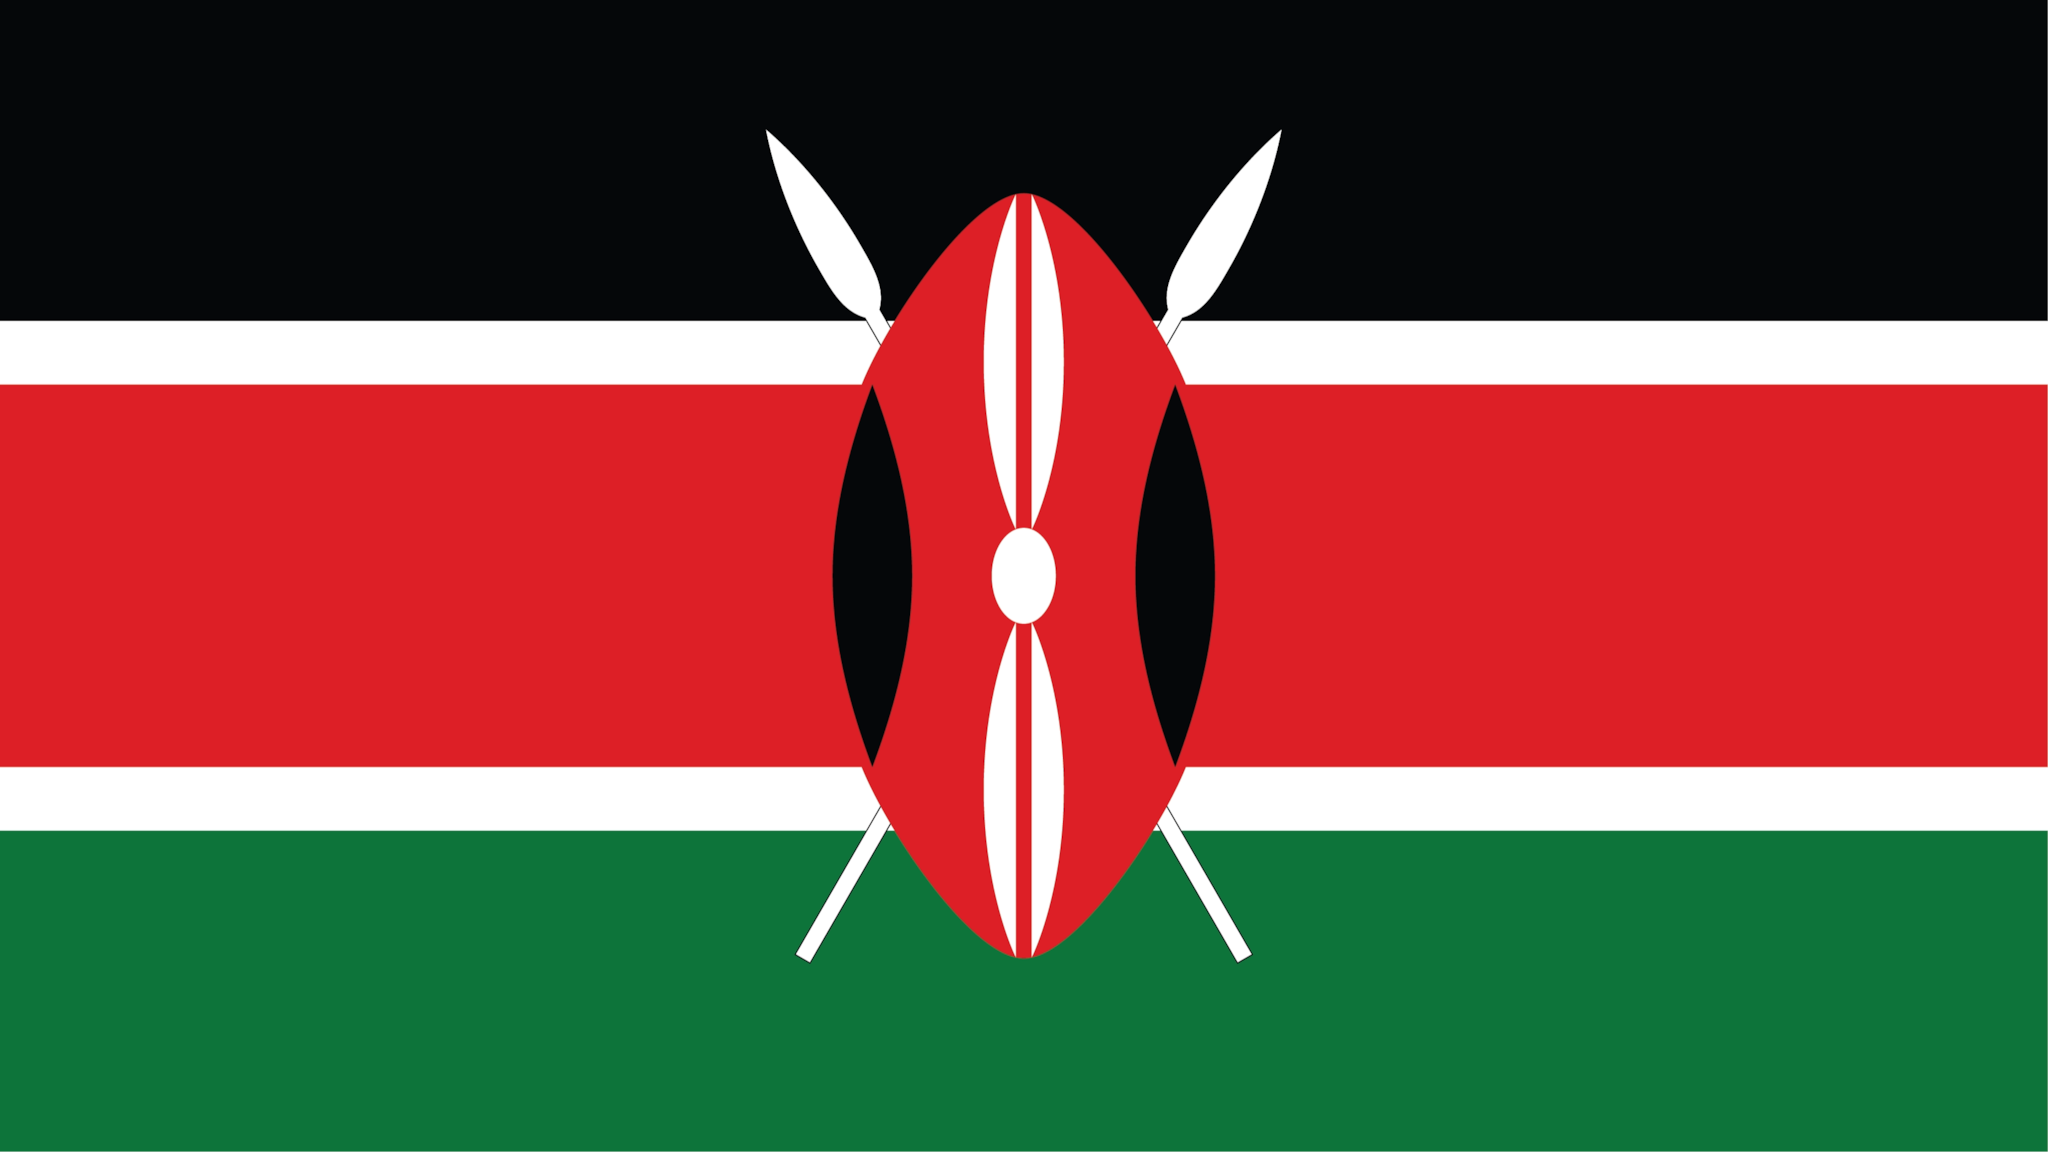 Three equal horizontal bands of black (top), red, and green; the red band is edged in white; a large Maasai warrior's shield covering crossed spears is superimposed at the center. The Maasai are a Nilotic ethnic group inhabiting northern, central and southern Kenya and northern Tanzania.